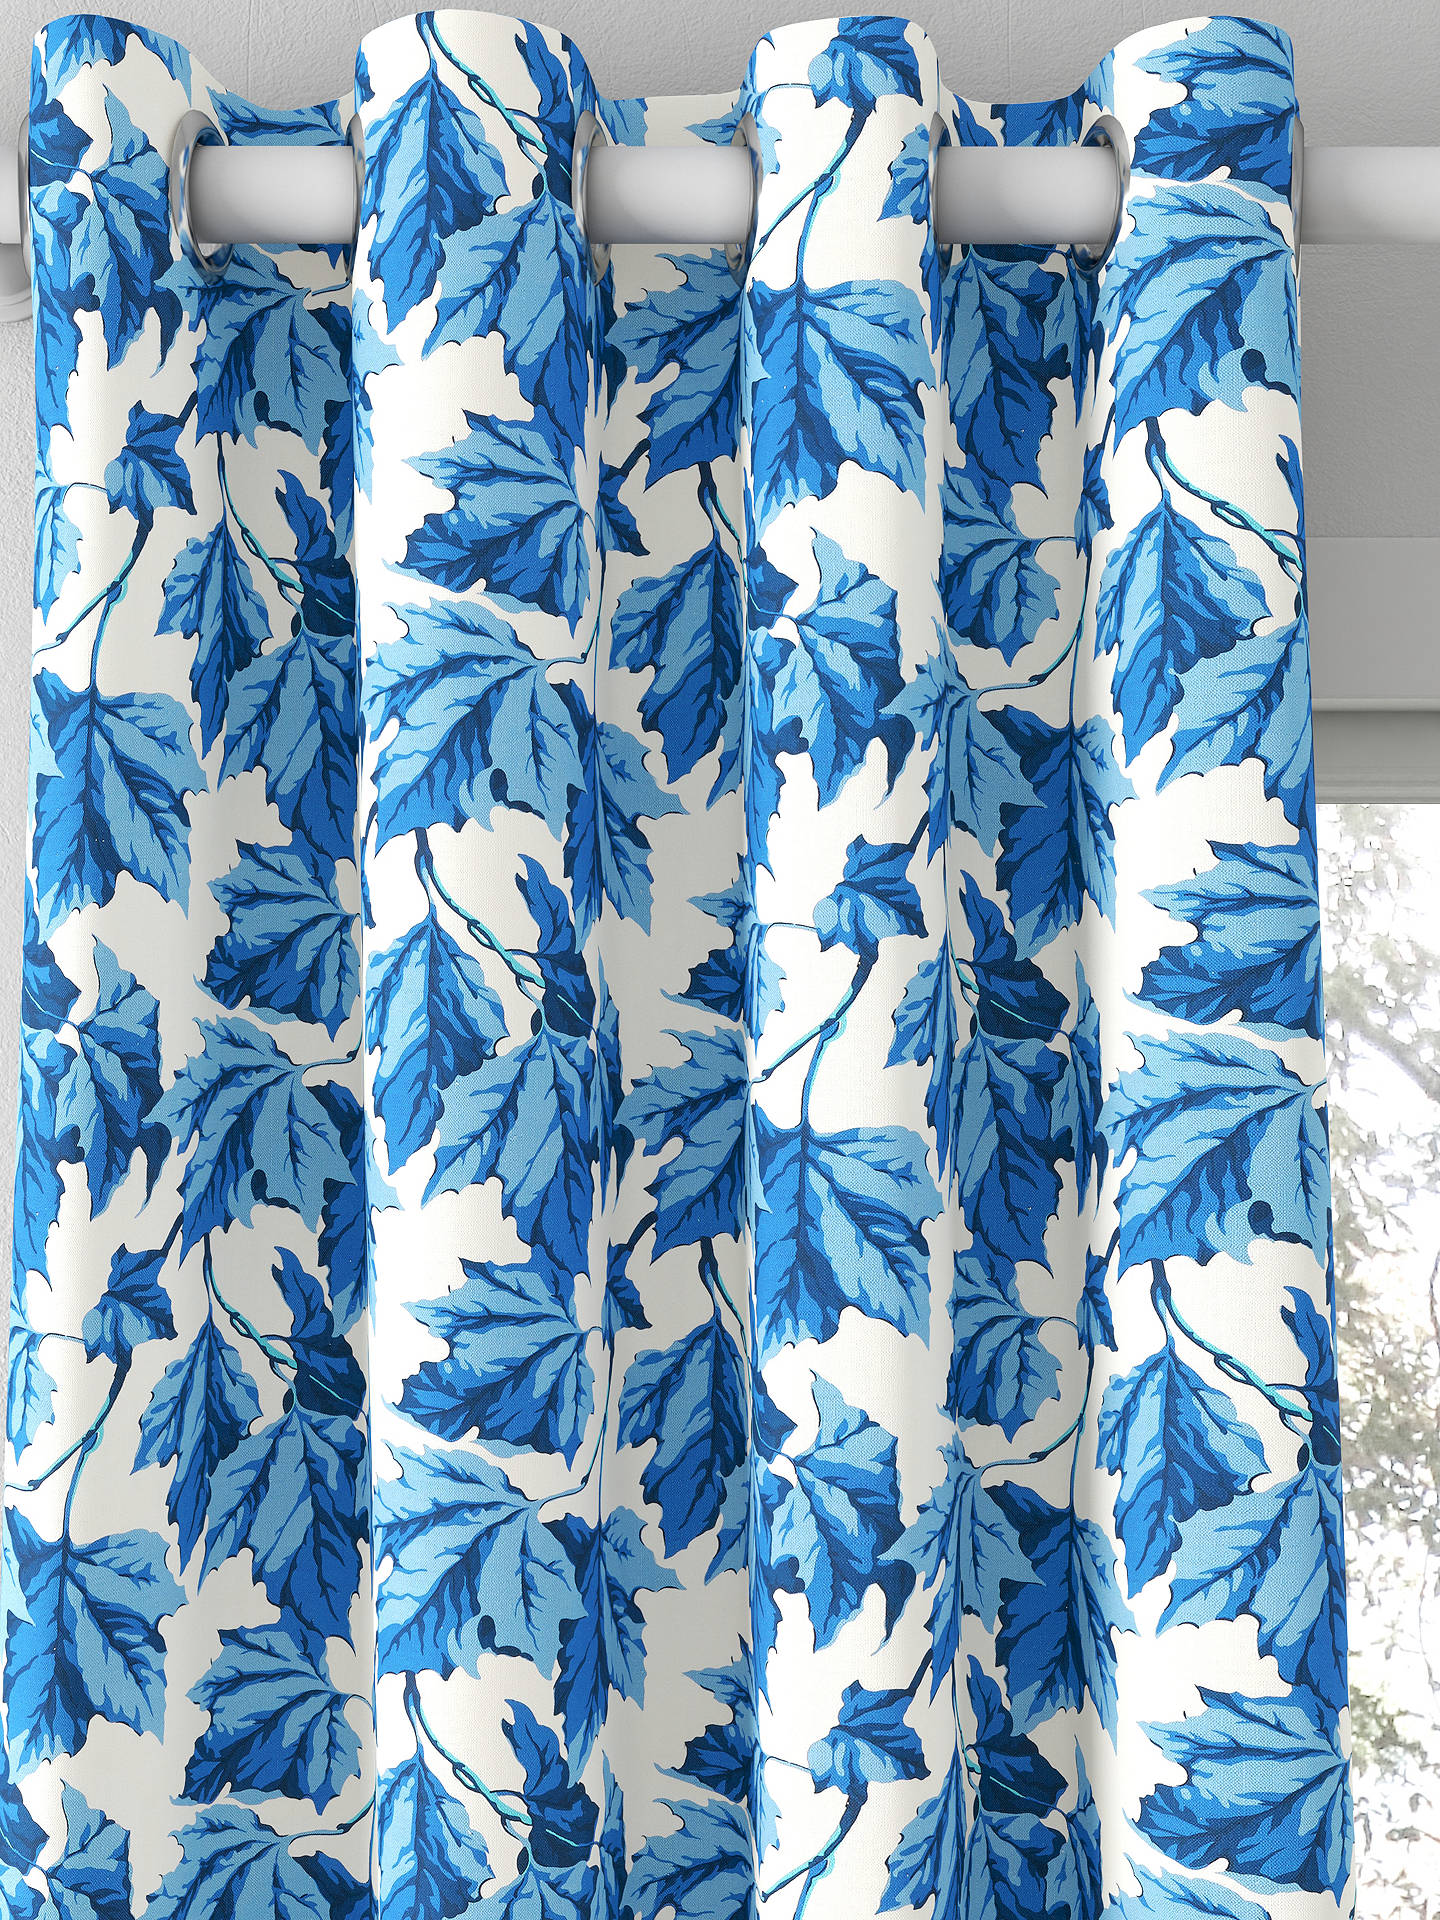 Harlequin x Sophie Robinson Dappled Leaf Made to Measure Curtains, Lapis